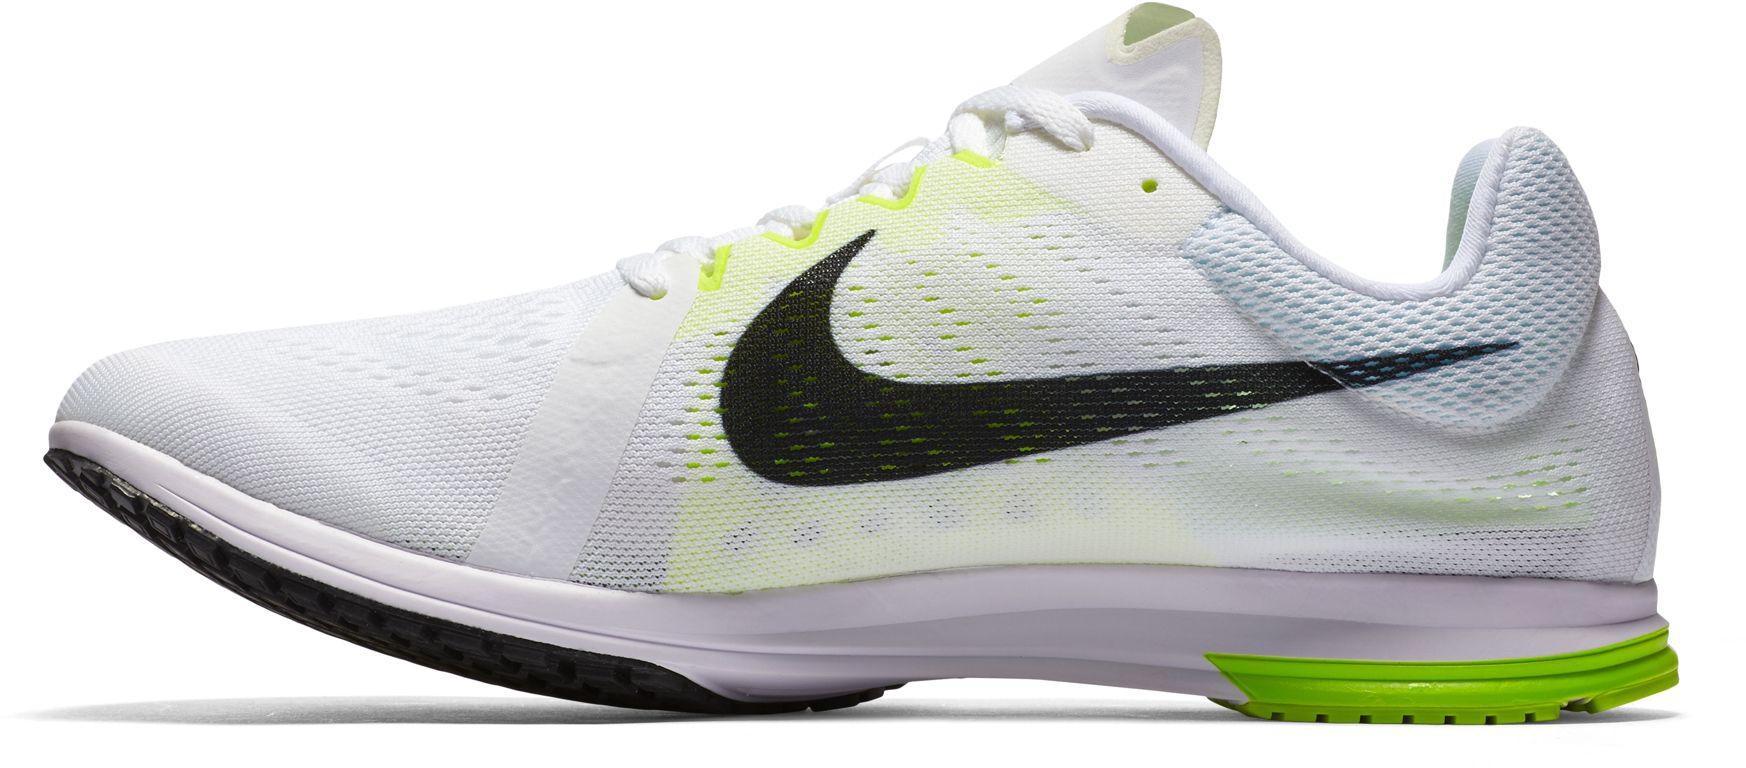 Nike Rubber Zoom Streak Lt 3 Track And Field Shoes in White for Men - Lyst